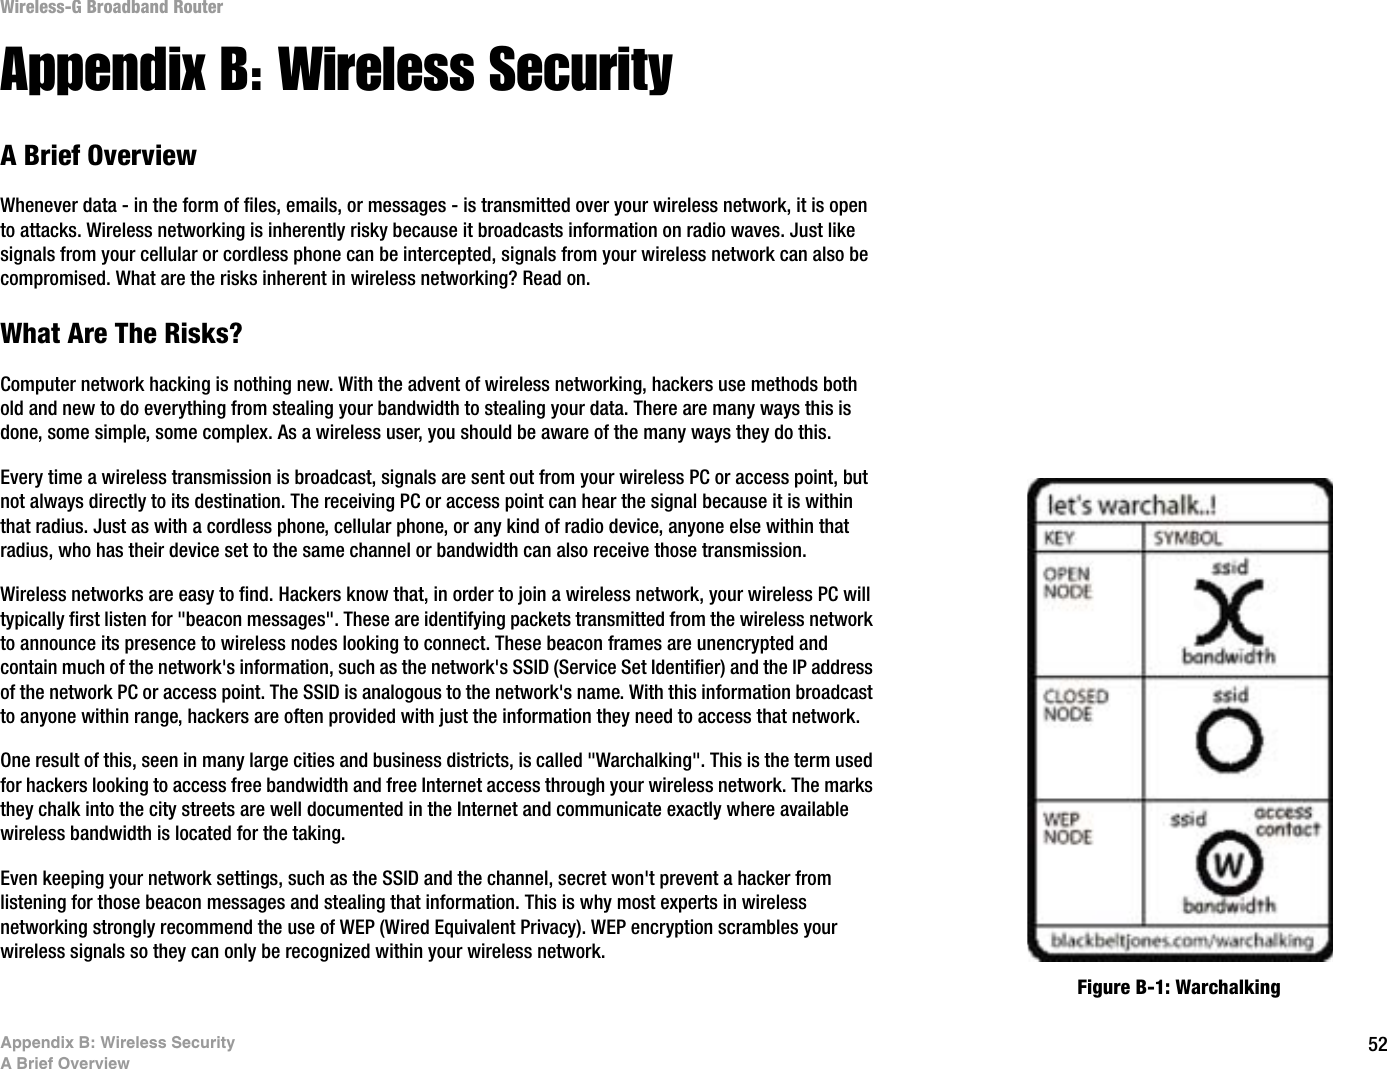 52Appendix B: Wireless SecurityA Brief OverviewWireless-G Broadband RouterAppendix B: Wireless SecurityA Brief OverviewWhenever data - in the form of files, emails, or messages - is transmitted over your wireless network, it is open to attacks. Wireless networking is inherently risky because it broadcasts information on radio waves. Just like signals from your cellular or cordless phone can be intercepted, signals from your wireless network can also be compromised. What are the risks inherent in wireless networking? Read on.What Are The Risks?Computer network hacking is nothing new. With the advent of wireless networking, hackers use methods both old and new to do everything from stealing your bandwidth to stealing your data. There are many ways this is done, some simple, some complex. As a wireless user, you should be aware of the many ways they do this.Every time a wireless transmission is broadcast, signals are sent out from your wireless PC or access point, but not always directly to its destination. The receiving PC or access point can hear the signal because it is within that radius. Just as with a cordless phone, cellular phone, or any kind of radio device, anyone else within that radius, who has their device set to the same channel or bandwidth can also receive those transmission.Wireless networks are easy to find. Hackers know that, in order to join a wireless network, your wireless PC will typically first listen for &quot;beacon messages&quot;. These are identifying packets transmitted from the wireless network to announce its presence to wireless nodes looking to connect. These beacon frames are unencrypted and contain much of the network&apos;s information, such as the network&apos;s SSID (Service Set Identifier) and the IP address of the network PC or access point. The SSID is analogous to the network&apos;s name. With this information broadcast to anyone within range, hackers are often provided with just the information they need to access that network.One result of this, seen in many large cities and business districts, is called &quot;Warchalking&quot;. This is the term used for hackers looking to access free bandwidth and free Internet access through your wireless network. The marks they chalk into the city streets are well documented in the Internet and communicate exactly where available wireless bandwidth is located for the taking.Even keeping your network settings, such as the SSID and the channel, secret won&apos;t prevent a hacker from listening for those beacon messages and stealing that information. This is why most experts in wireless networking strongly recommend the use of WEP (Wired Equivalent Privacy). WEP encryption scrambles your wireless signals so they can only be recognized within your wireless network.Figure B-1: Warchalking